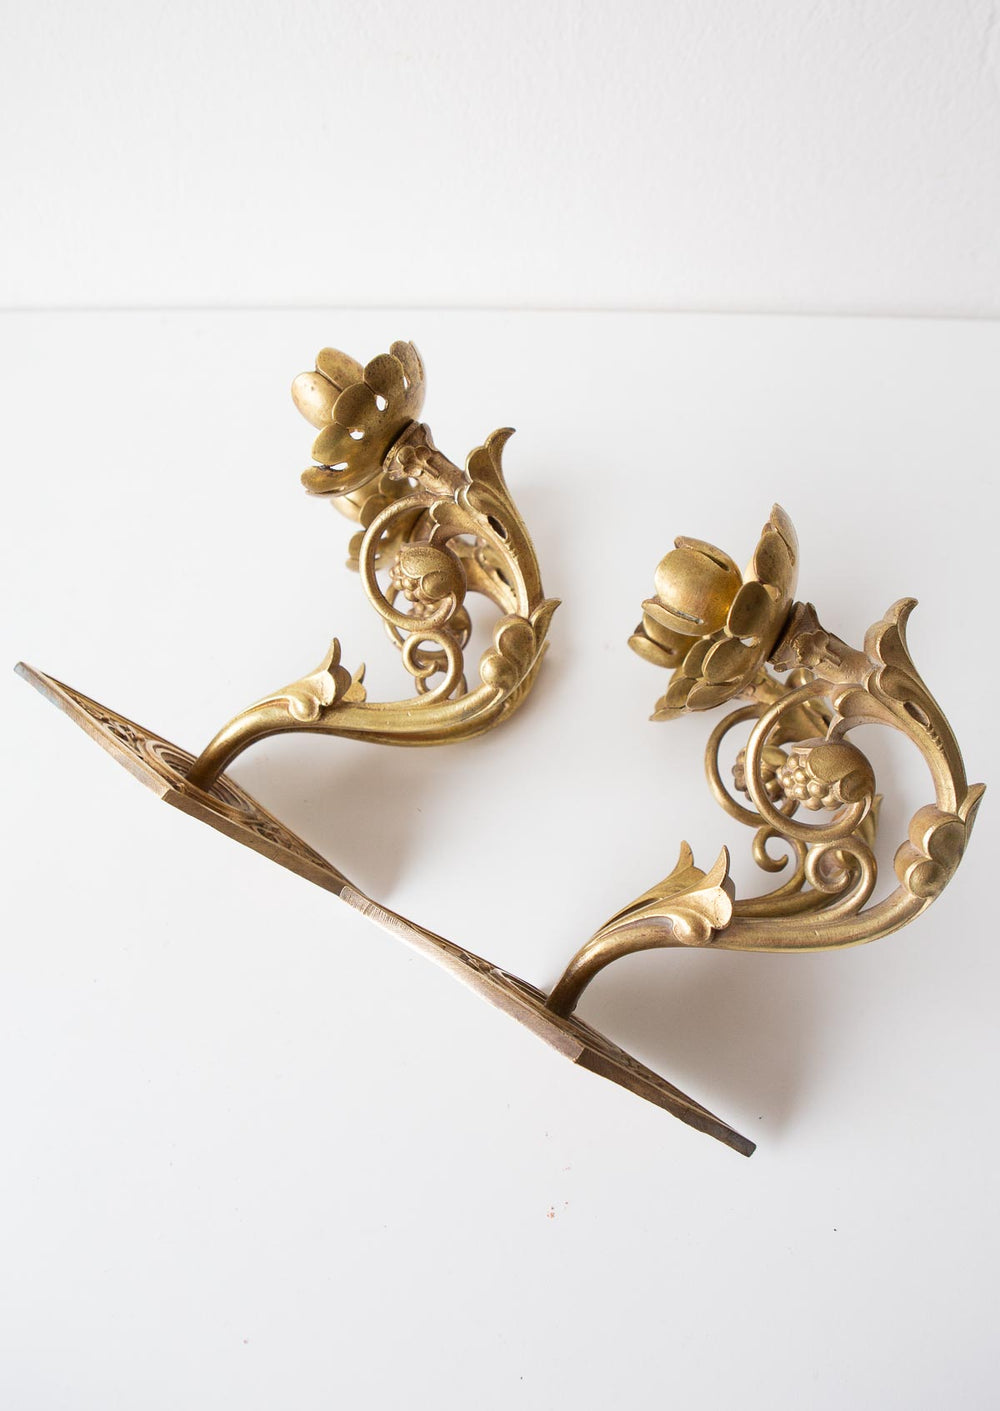 Pareja antiguos candelabros de pared franceses pair of french wall candleholders